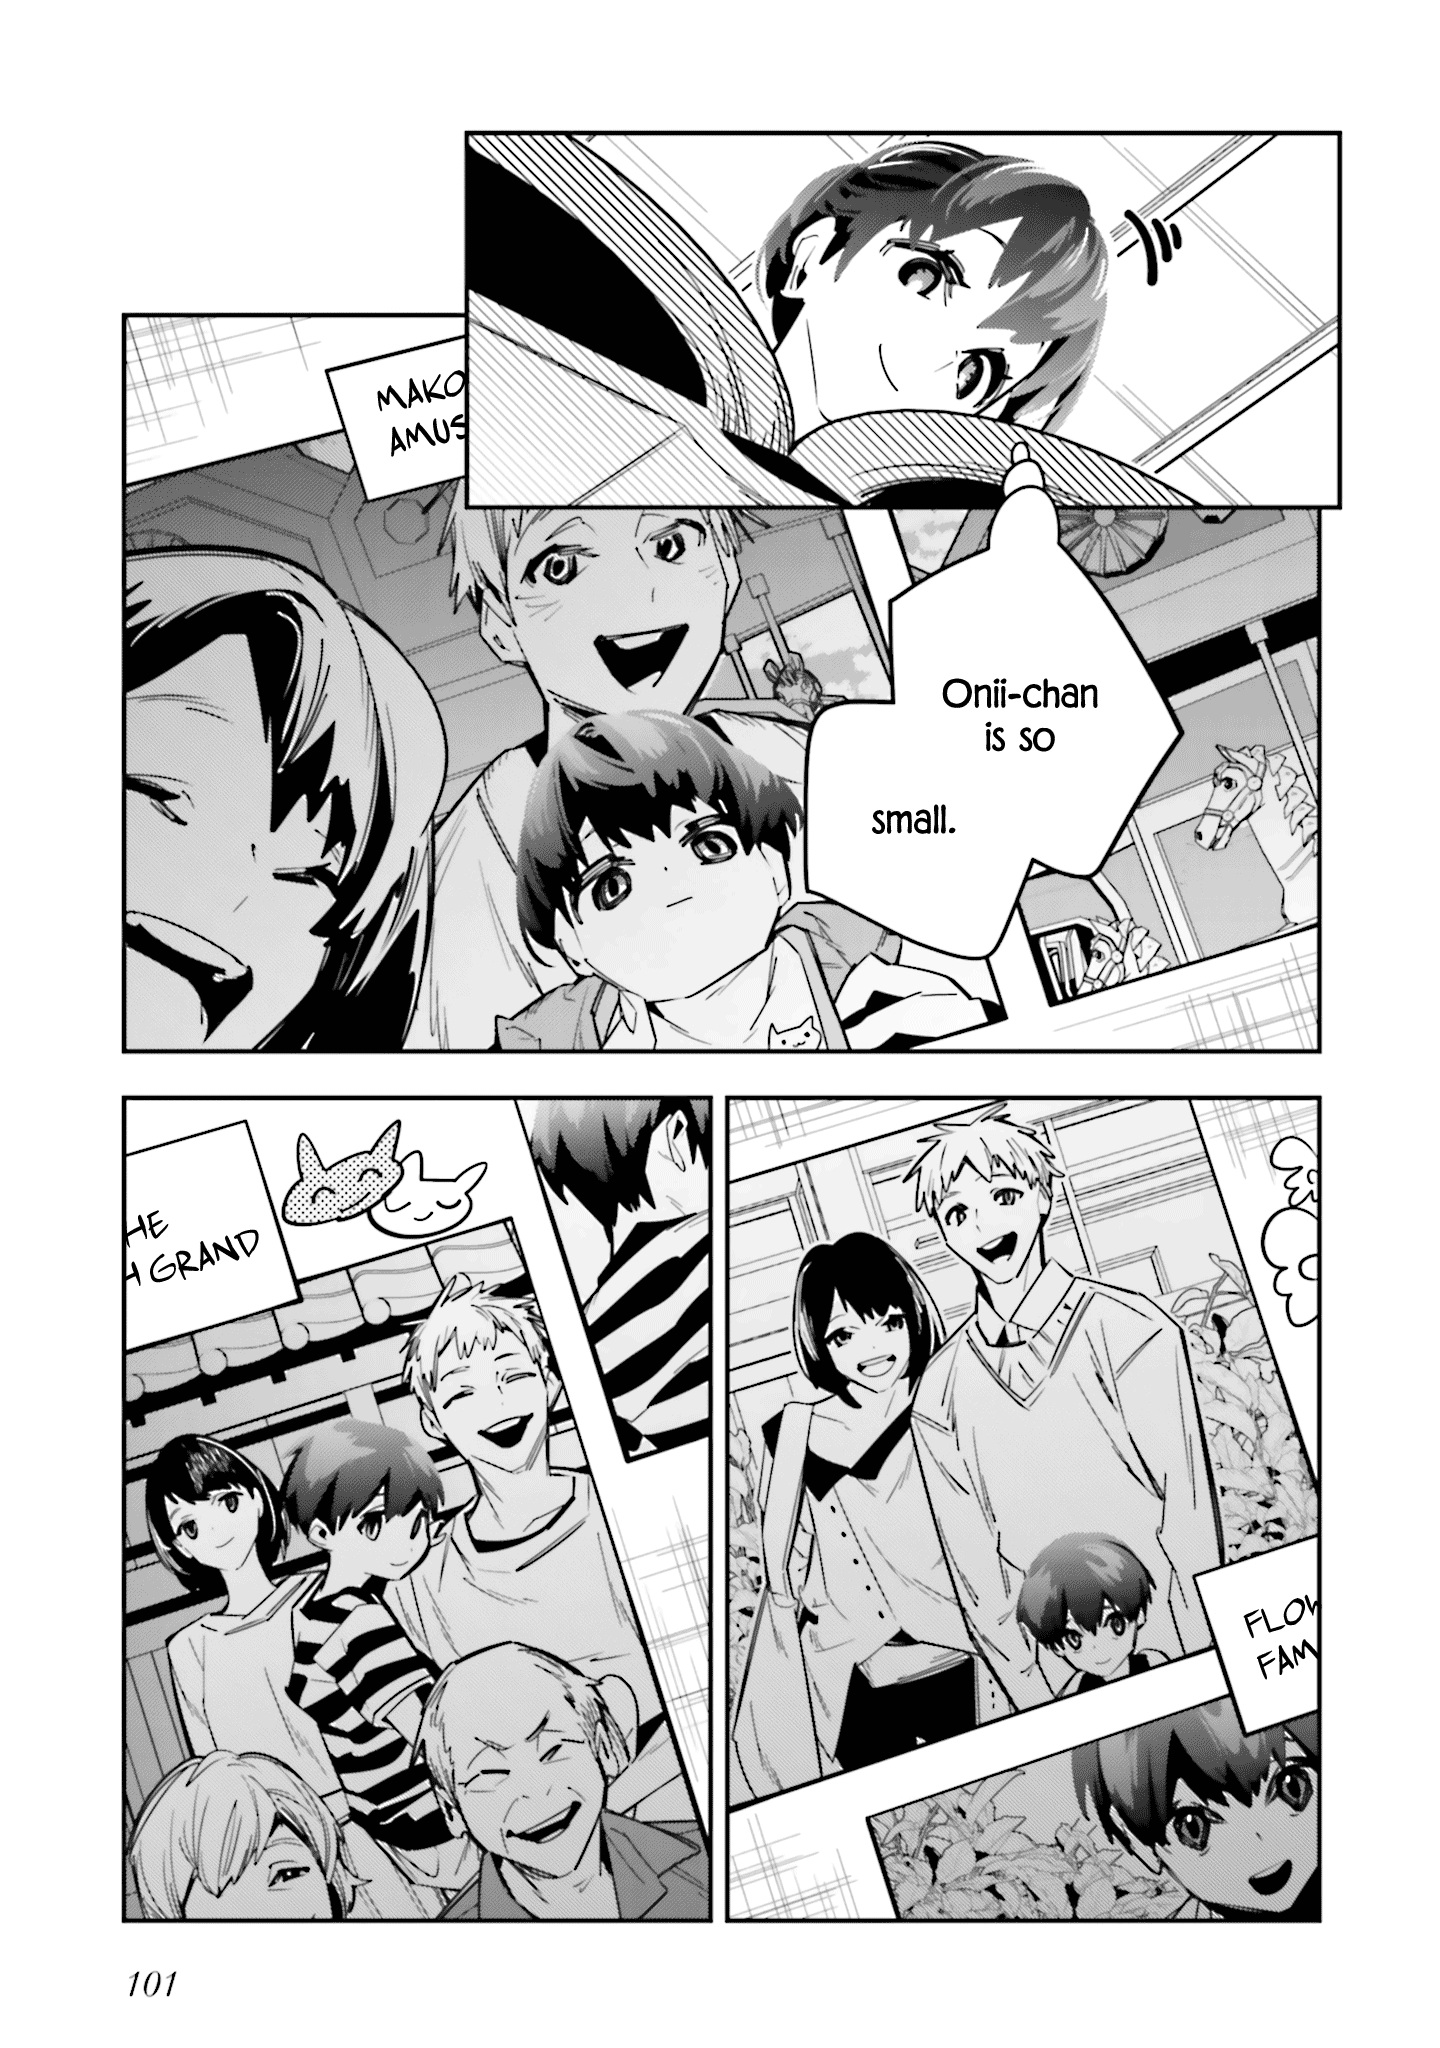 I Reincarnated As The Little Sister Of A Death Game Manga's Murder Mastermind And Failed Chapter 3 #7